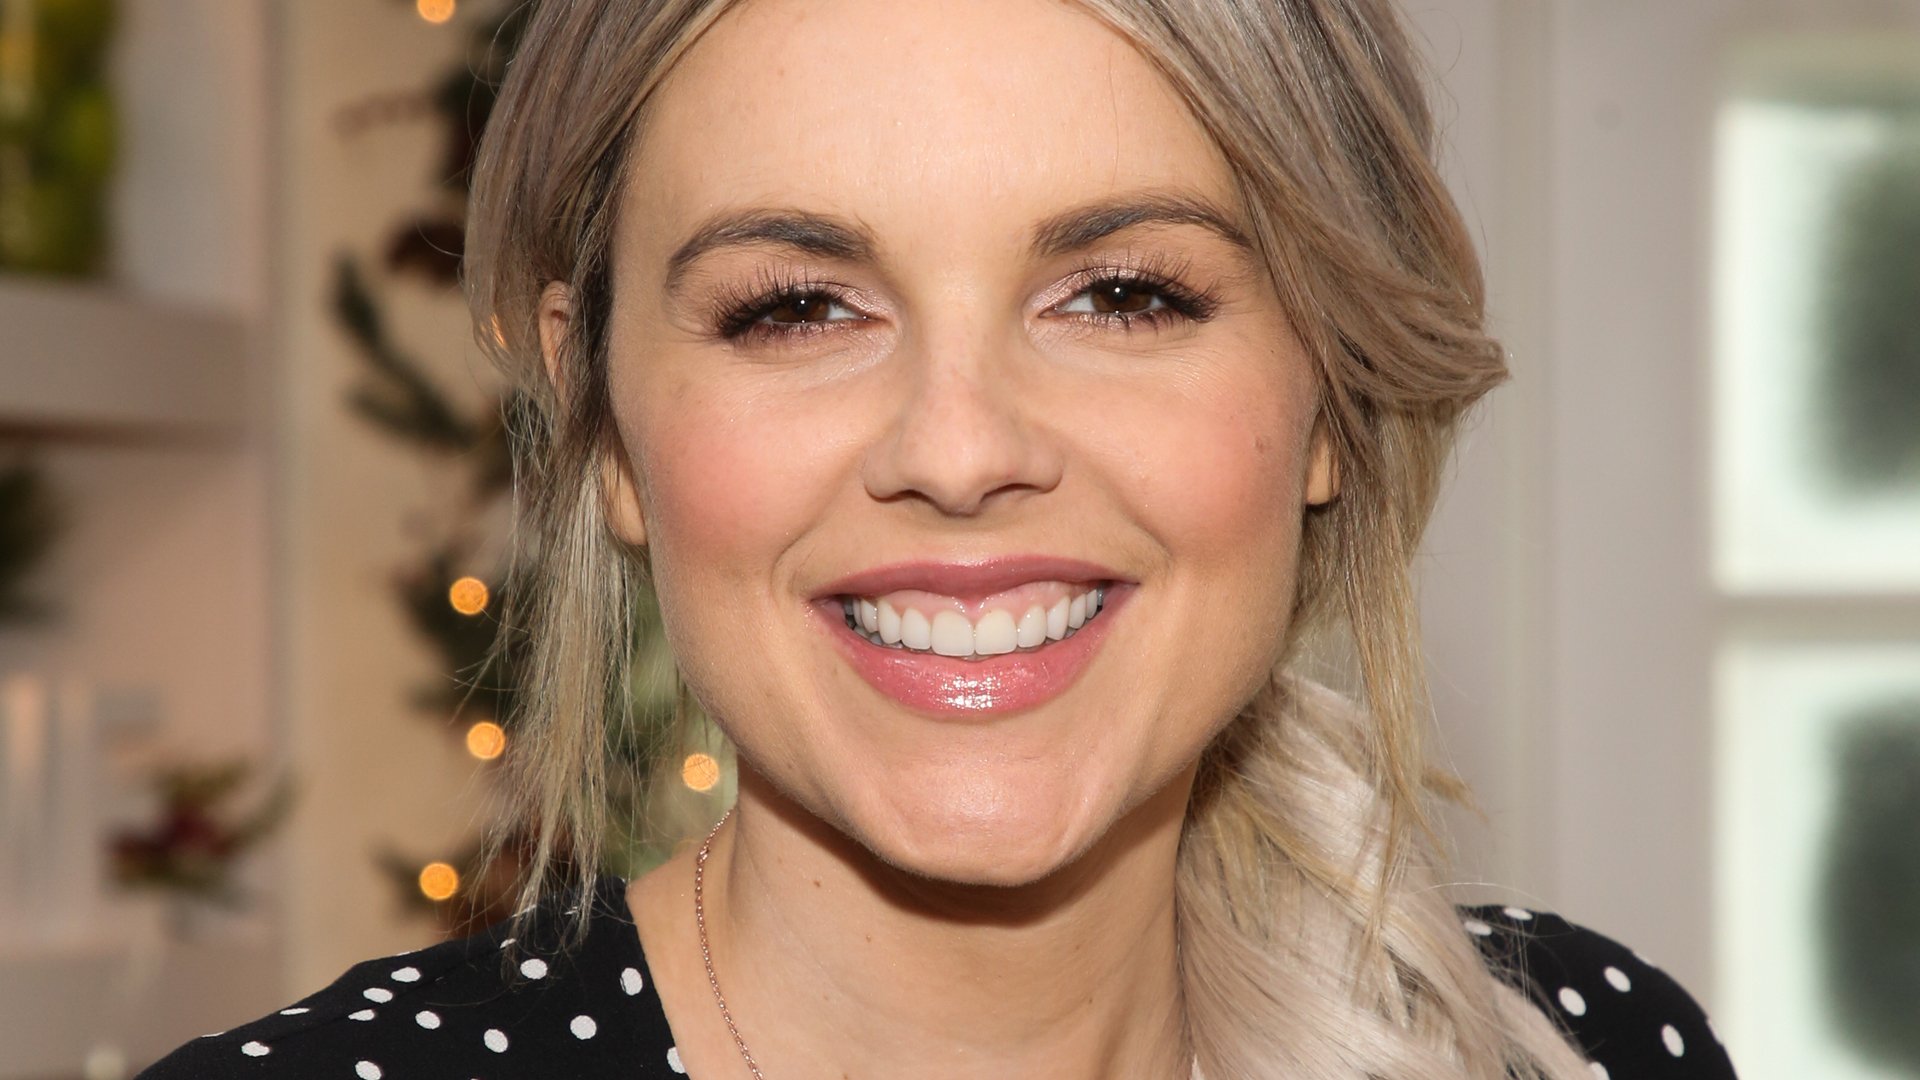 'The Bachelorette' star Ali Fedotowsky-Manno on the set of Hallmark Channel's "Home & Family" at Universal Studios Hollywood on October 29, 2019 in Universal City, California. 